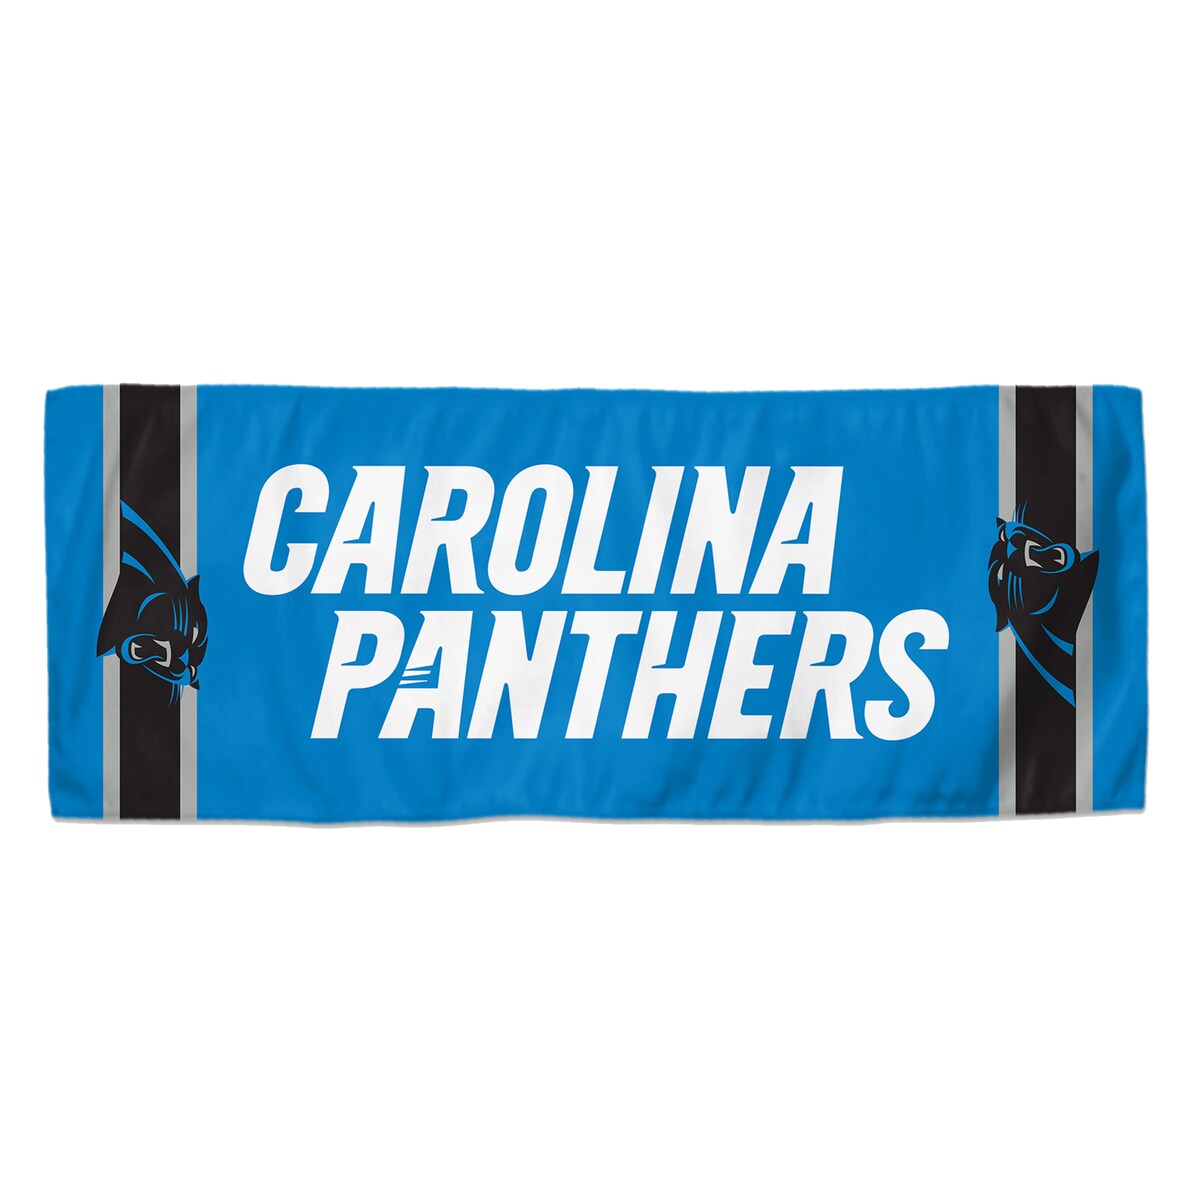 Beat the heat with this Carolina Panthers cooling towel from WinCraft!To utilize cooling properties, wet towel, wring out and snap to activateImportedBrand: WinCraftOfficially licensedMachine washMaterial: 87% Polyester/13% NylonPackaged in an attractive tube for storageMeasures approximately 12" x 30"Printed in the USADries softCools to 30 degrees below average body temperatureTaglessUPF 50 protectionPrinted artworkChemical free fabric